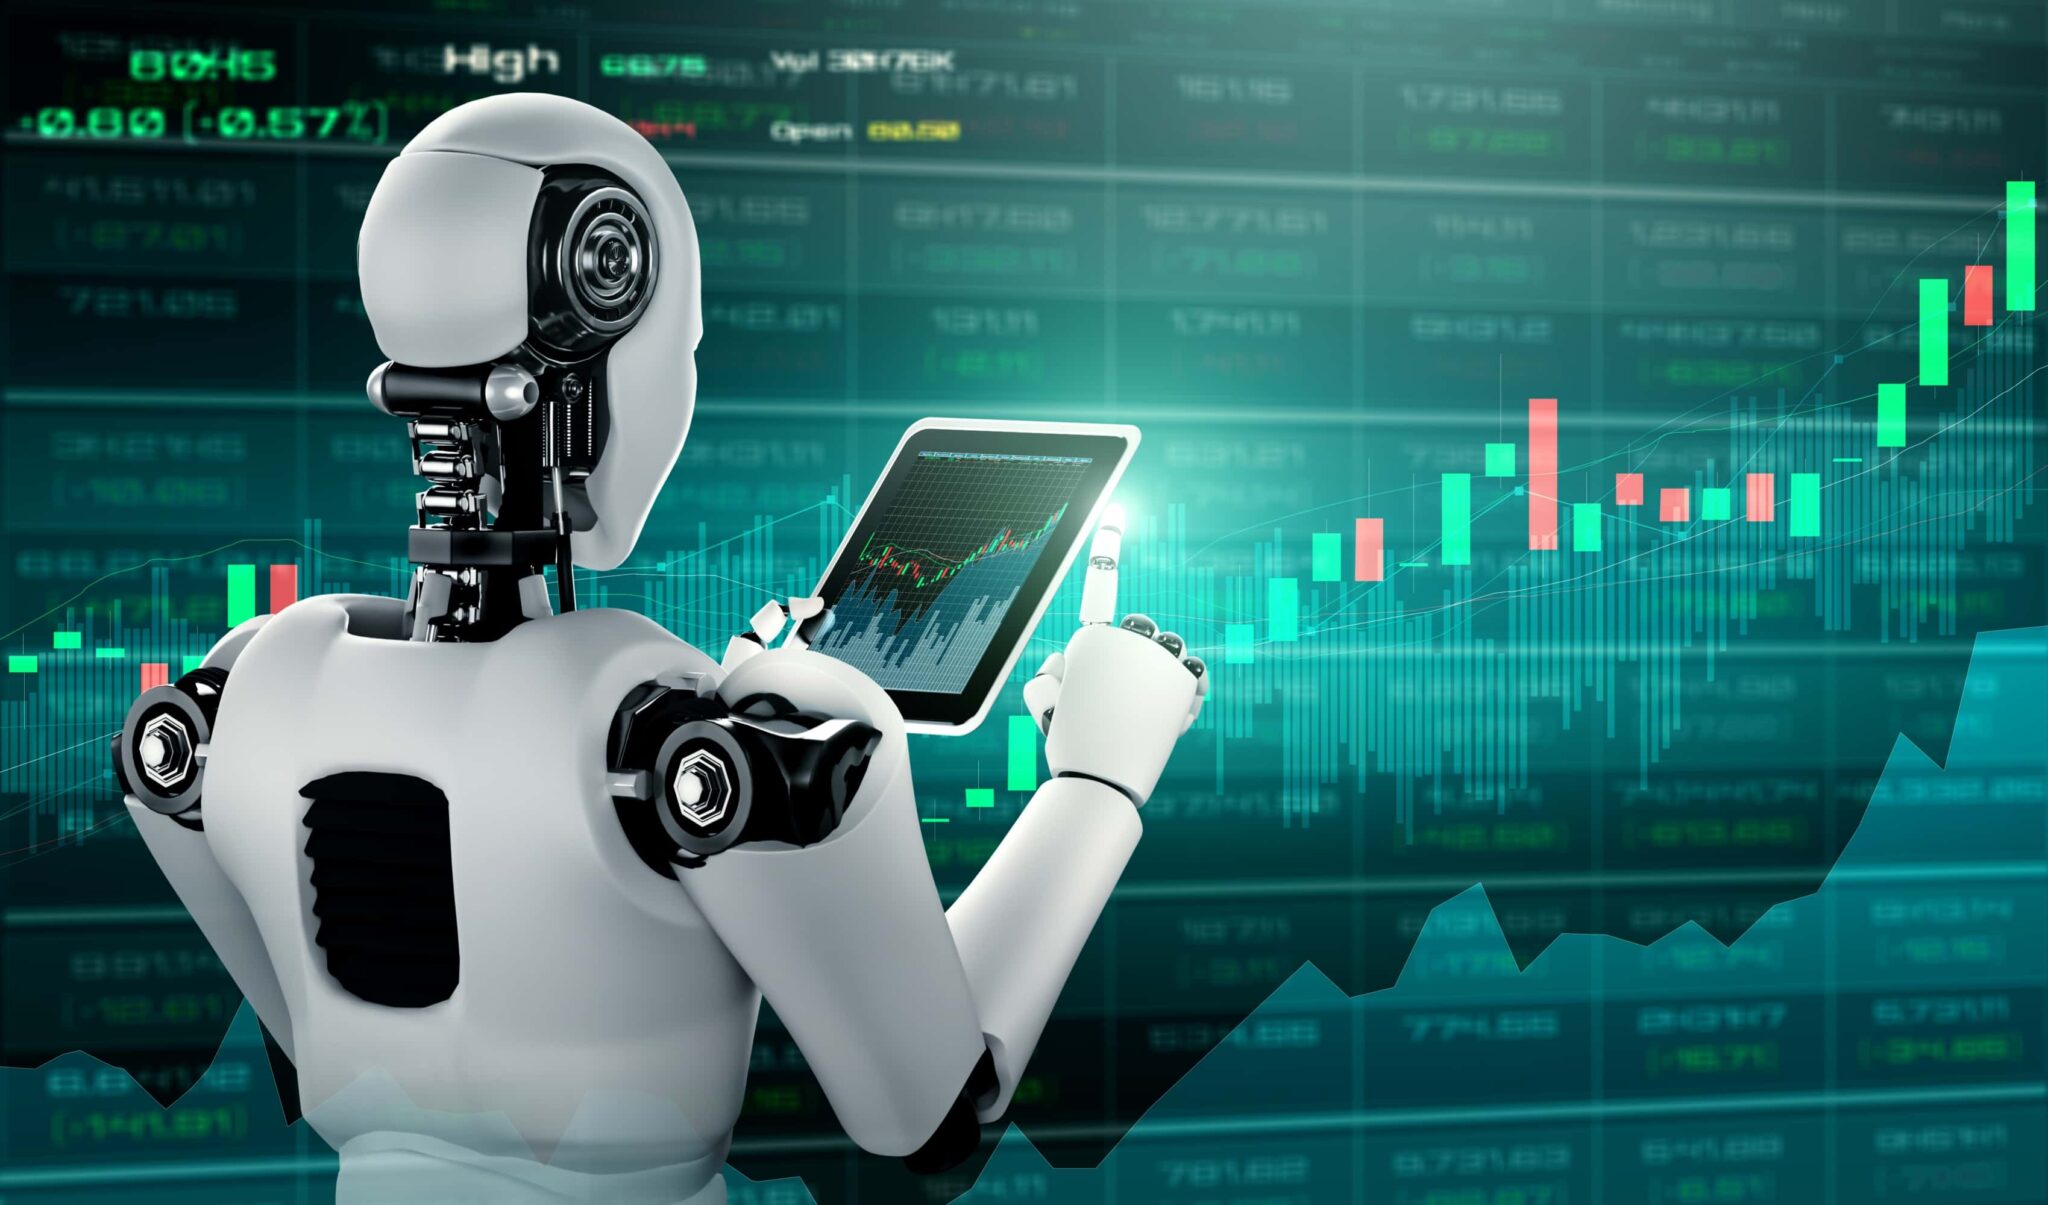 Paid forex robots change in price